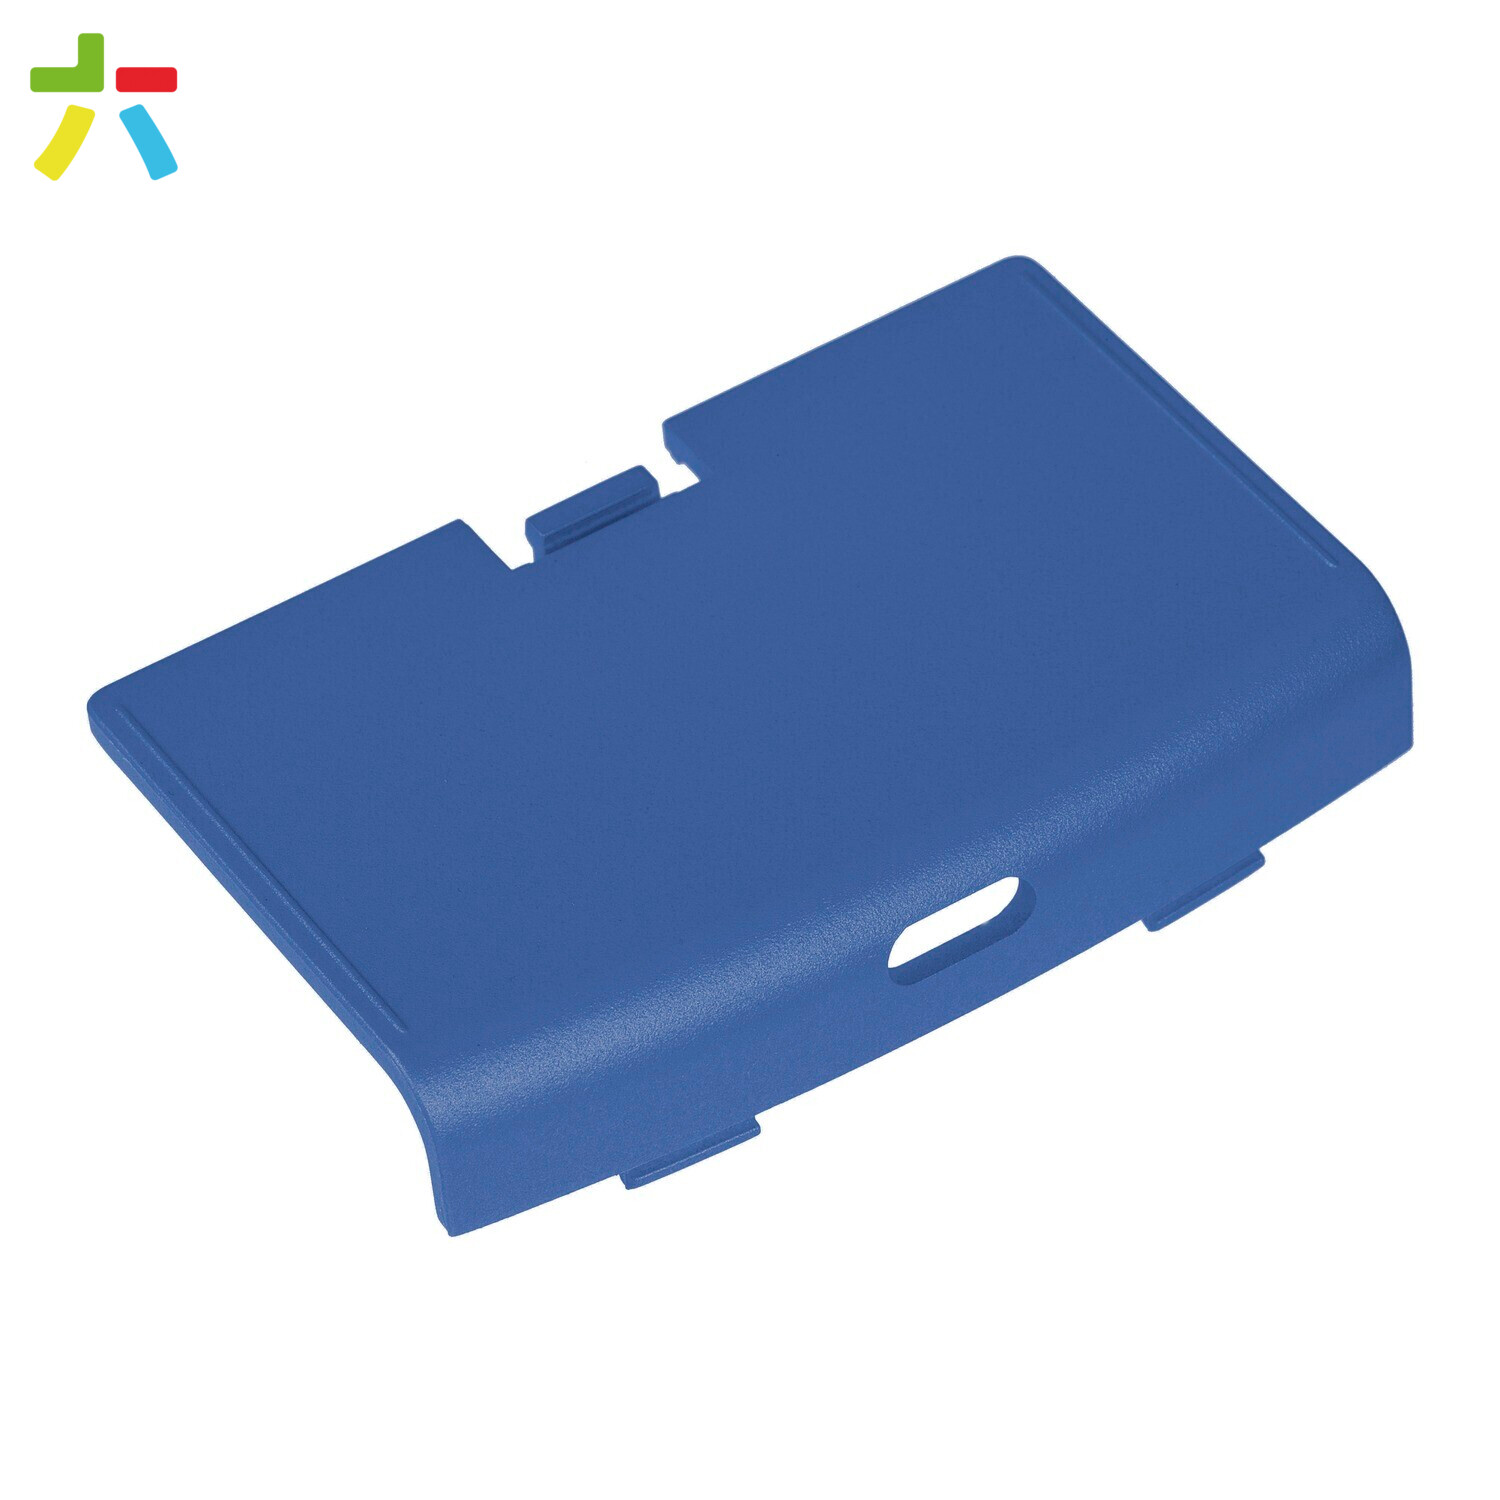 Game Boy Advance USB-C Battery Cover (Pearl Blue - Soft Touch)